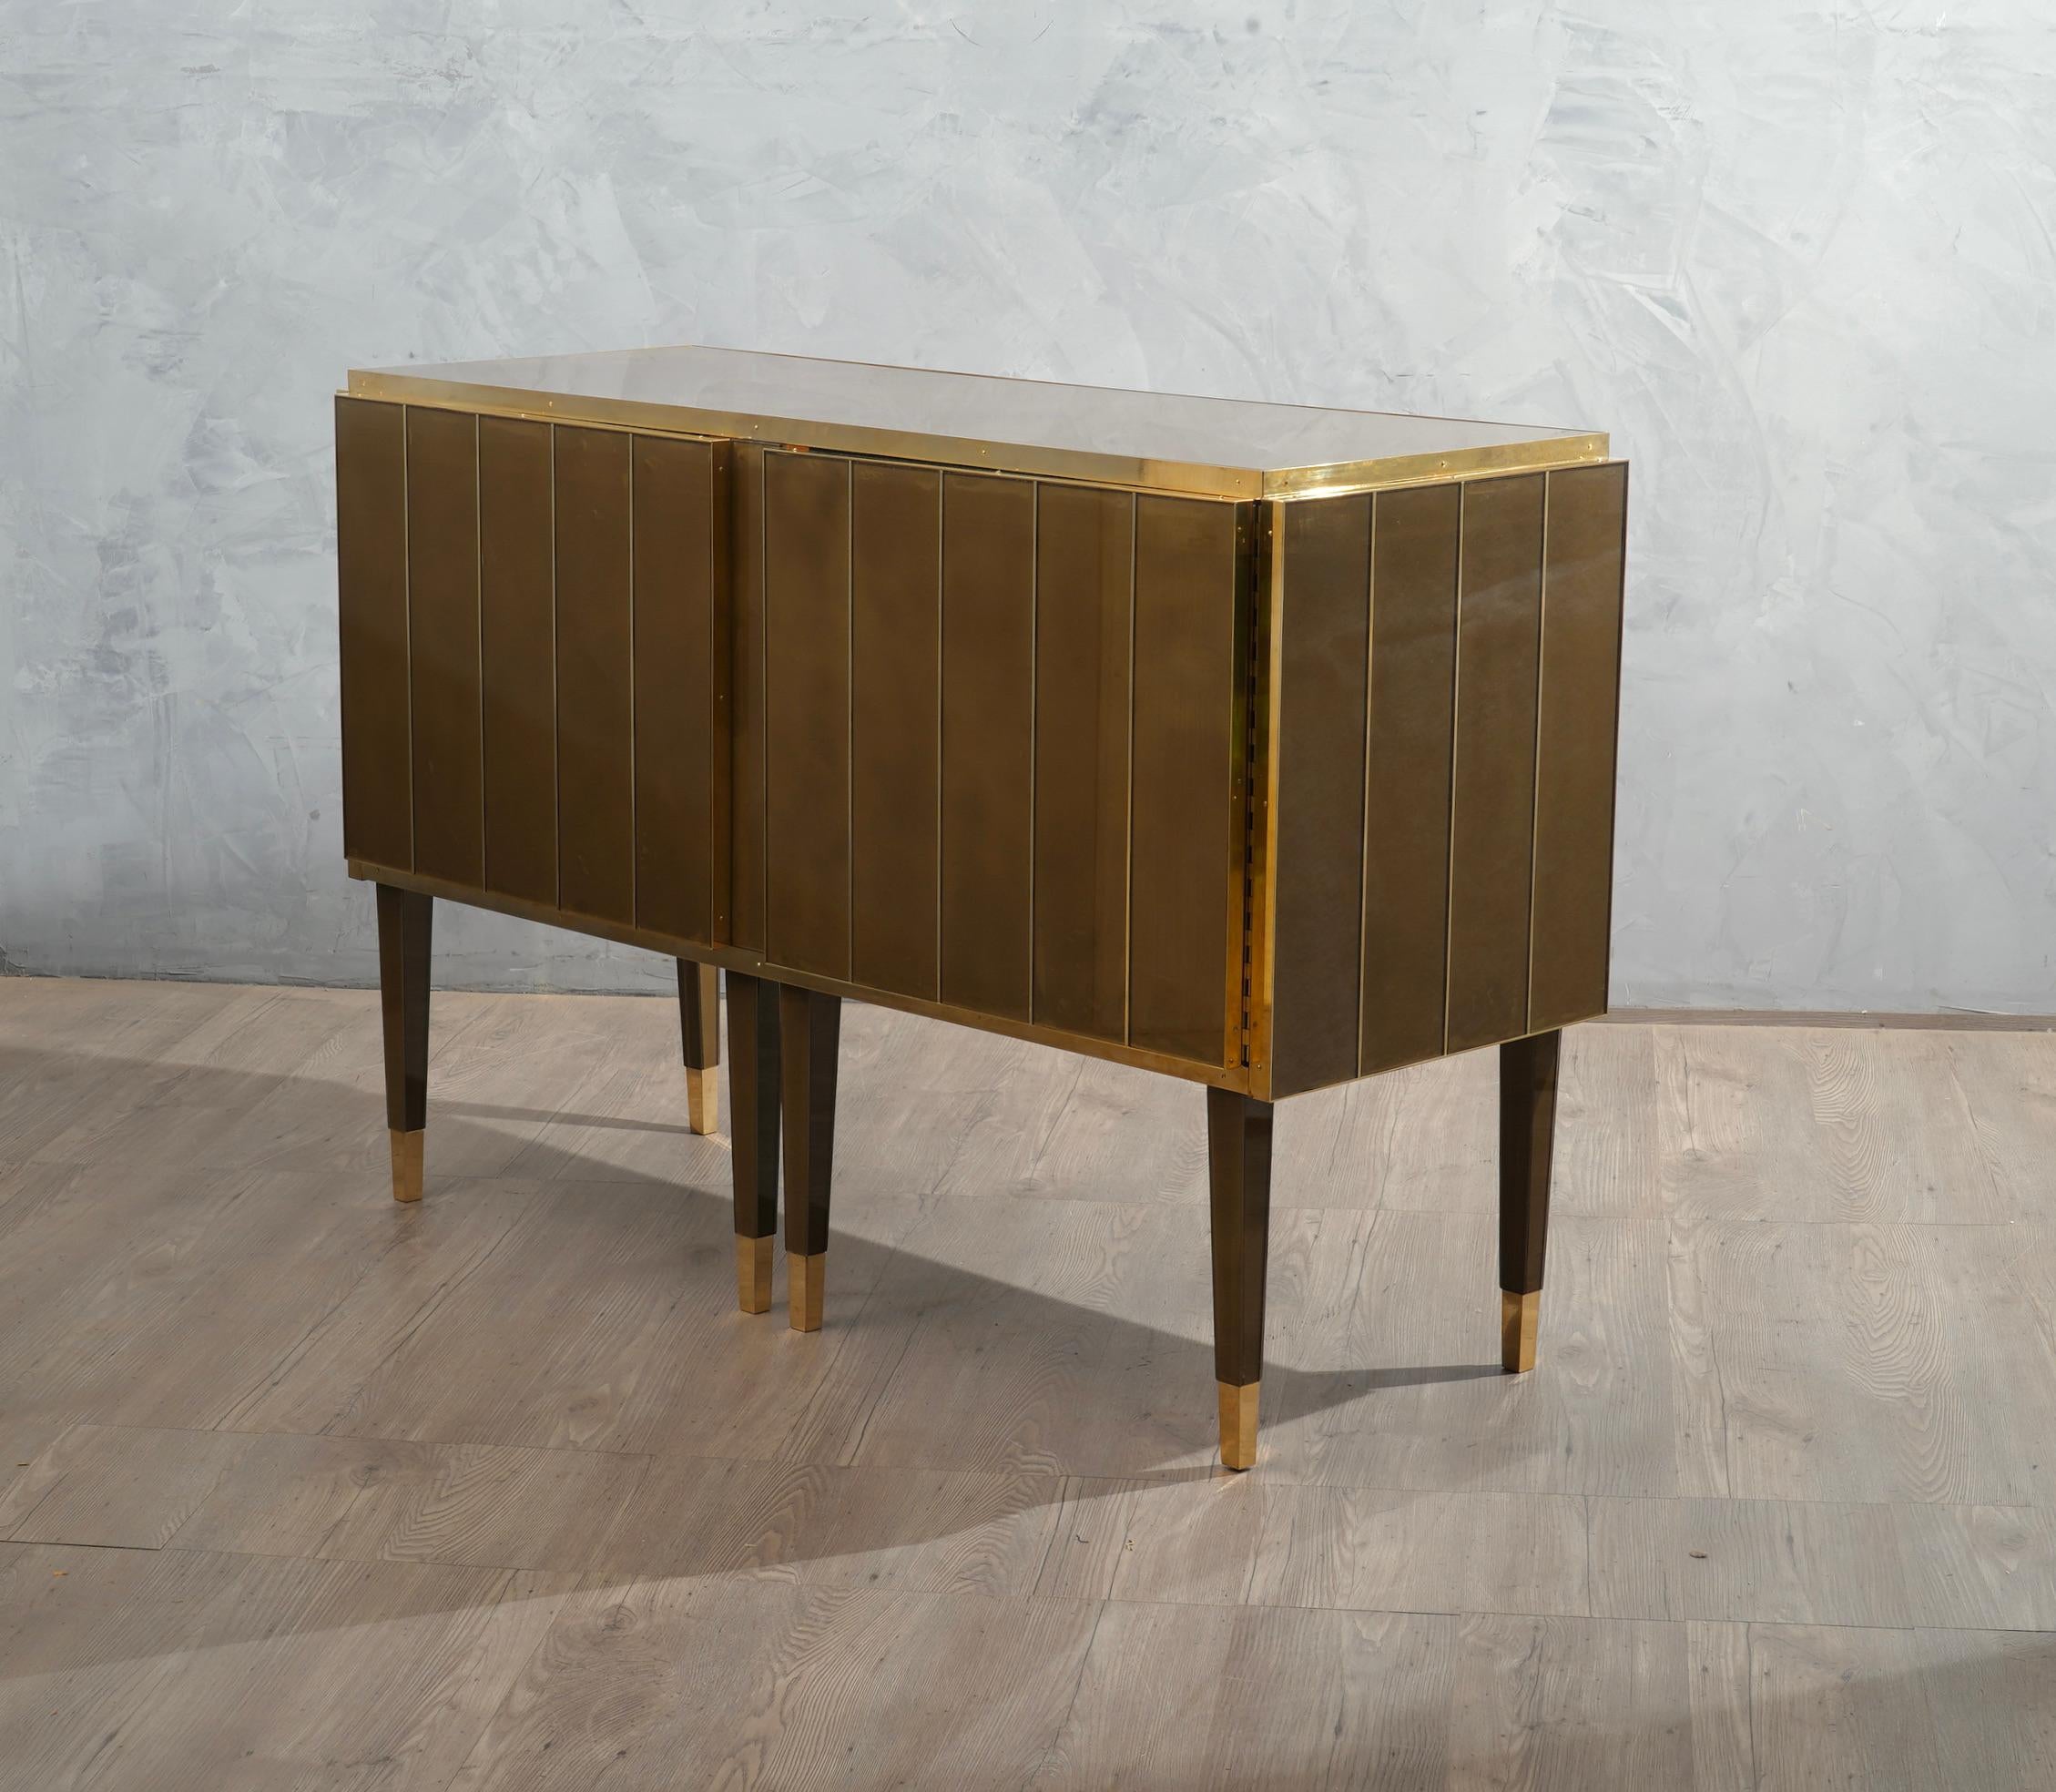 A unique sideboard of its kind for its originality and for the options under construction. Full customization. Simple but refined design, note the briar veneer and well polished internal part.

The sideboard has a wooden structure, which was then